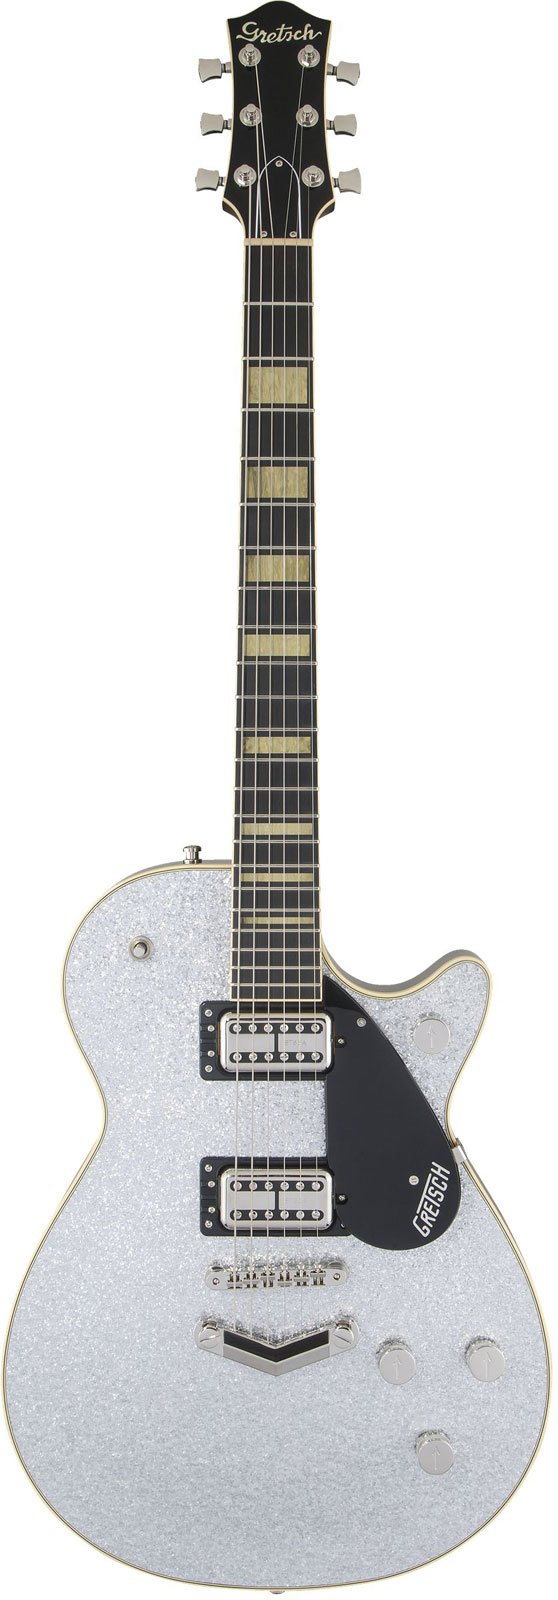 GRETSCH GUITARS G6229 PLAYERS EDITION JET BT WITH V-STOPTAIL RW, SILVER SPARKLE